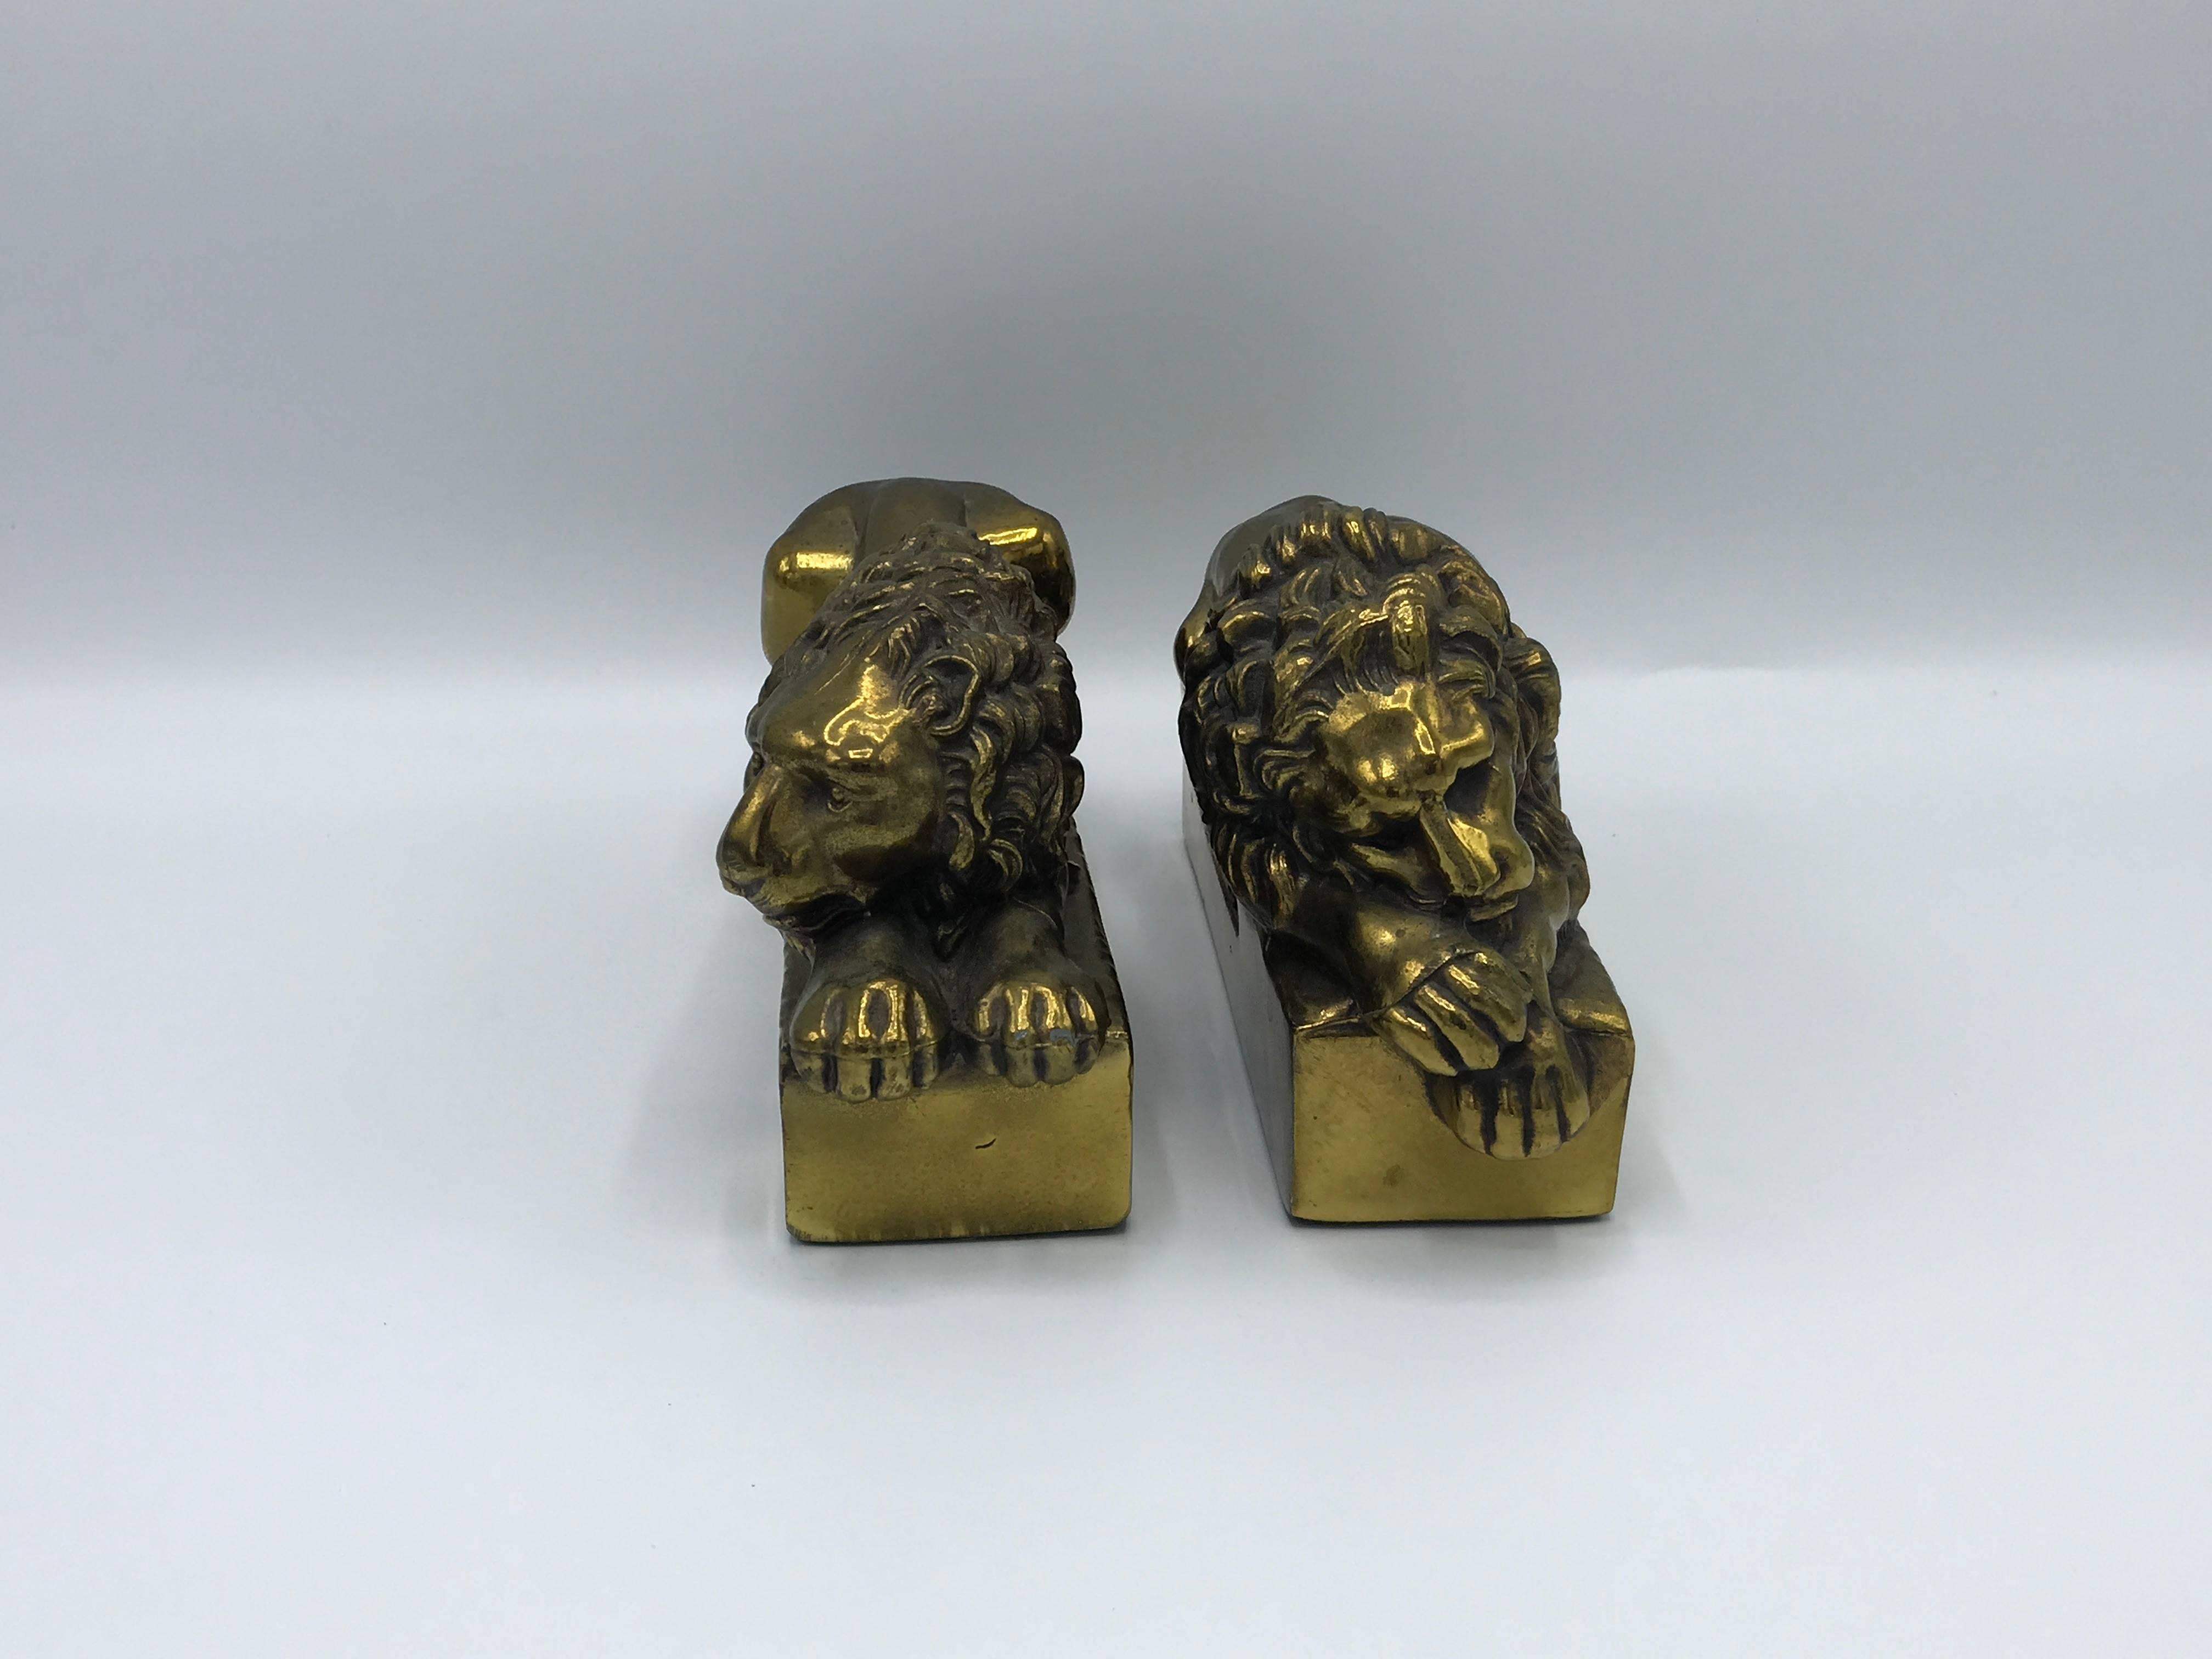 Offered is a stunning, pair of 1940s polished bronze lion bookends. Signed: "Antonio Canova. 1757-1872." These lions were originally sculpted by Antonio Canova (Italian, 1757-1822) in larger scale for the tomb of Pope Clement XIII in St.